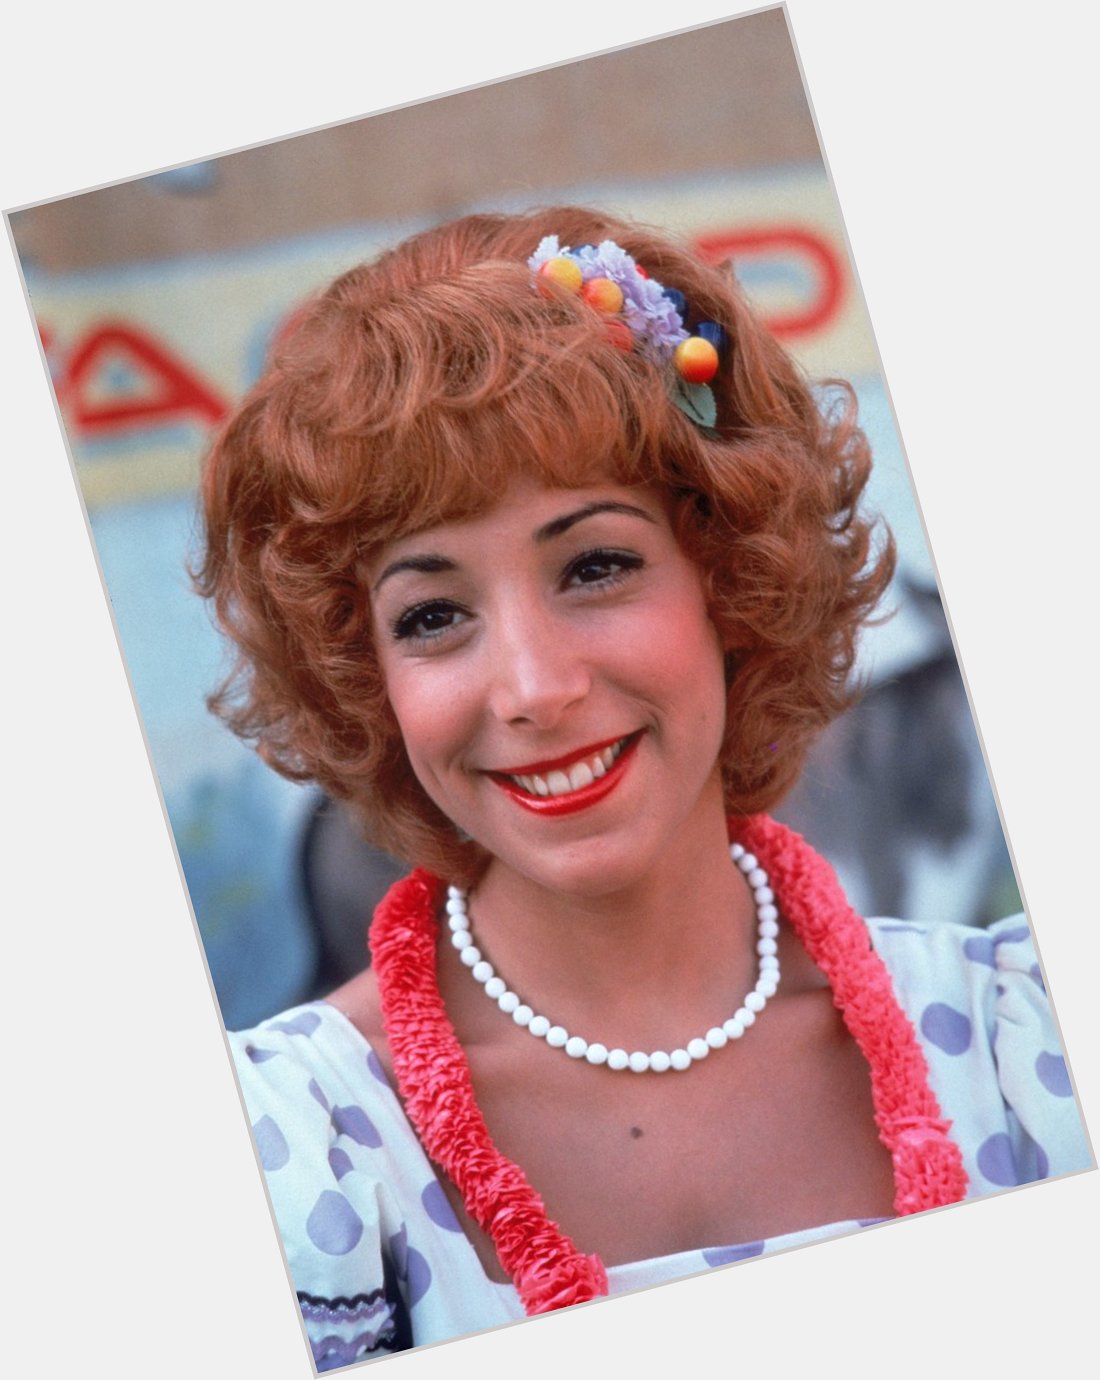 Wishing Didi Conn a happy birthday! Watch her play Frenchie on Who was your favorite friend from the movie? 